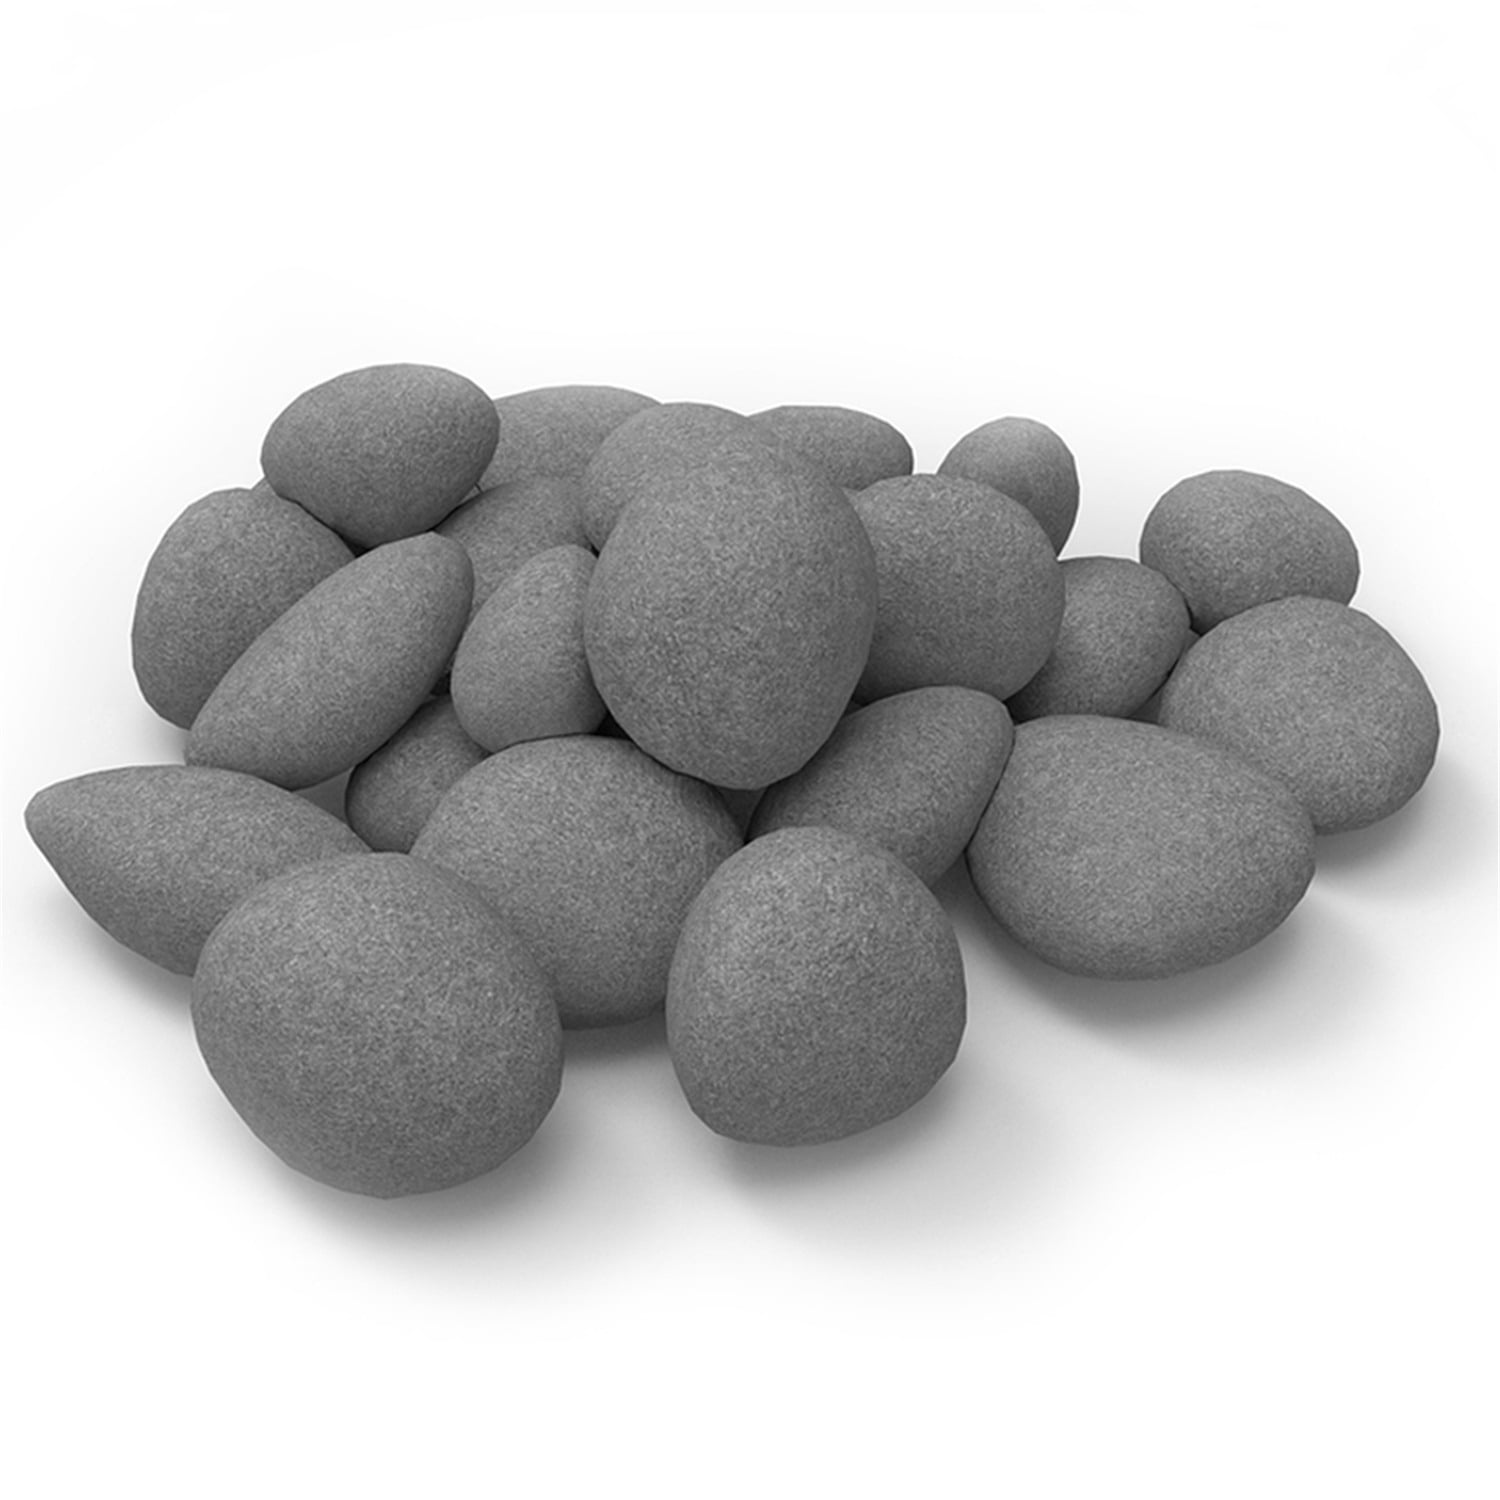 Gibson Living Set of 24 Light Weight Ceramic Fiber Gas Ethanol Electric Fireplace Pebbles in Gray